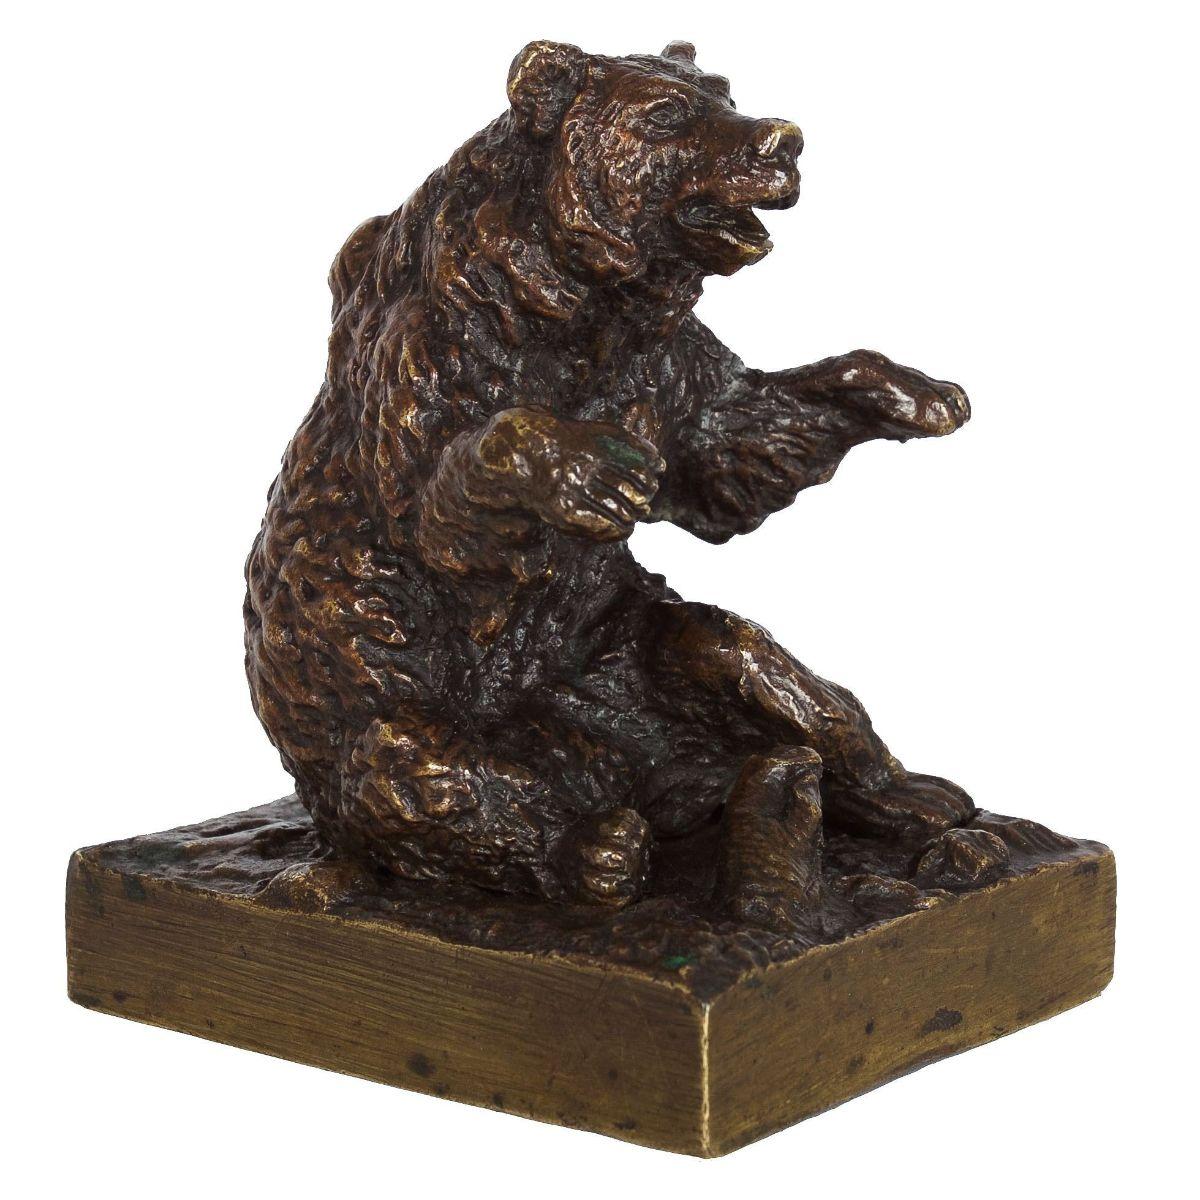 An unusual and very small cabinet bronze by Fratin of a seated bear with its paws raised in a playful manner, the bear's features avoid the humorous anthropomorphism of his popular bear caricatures while still lending a highly expressive face. The